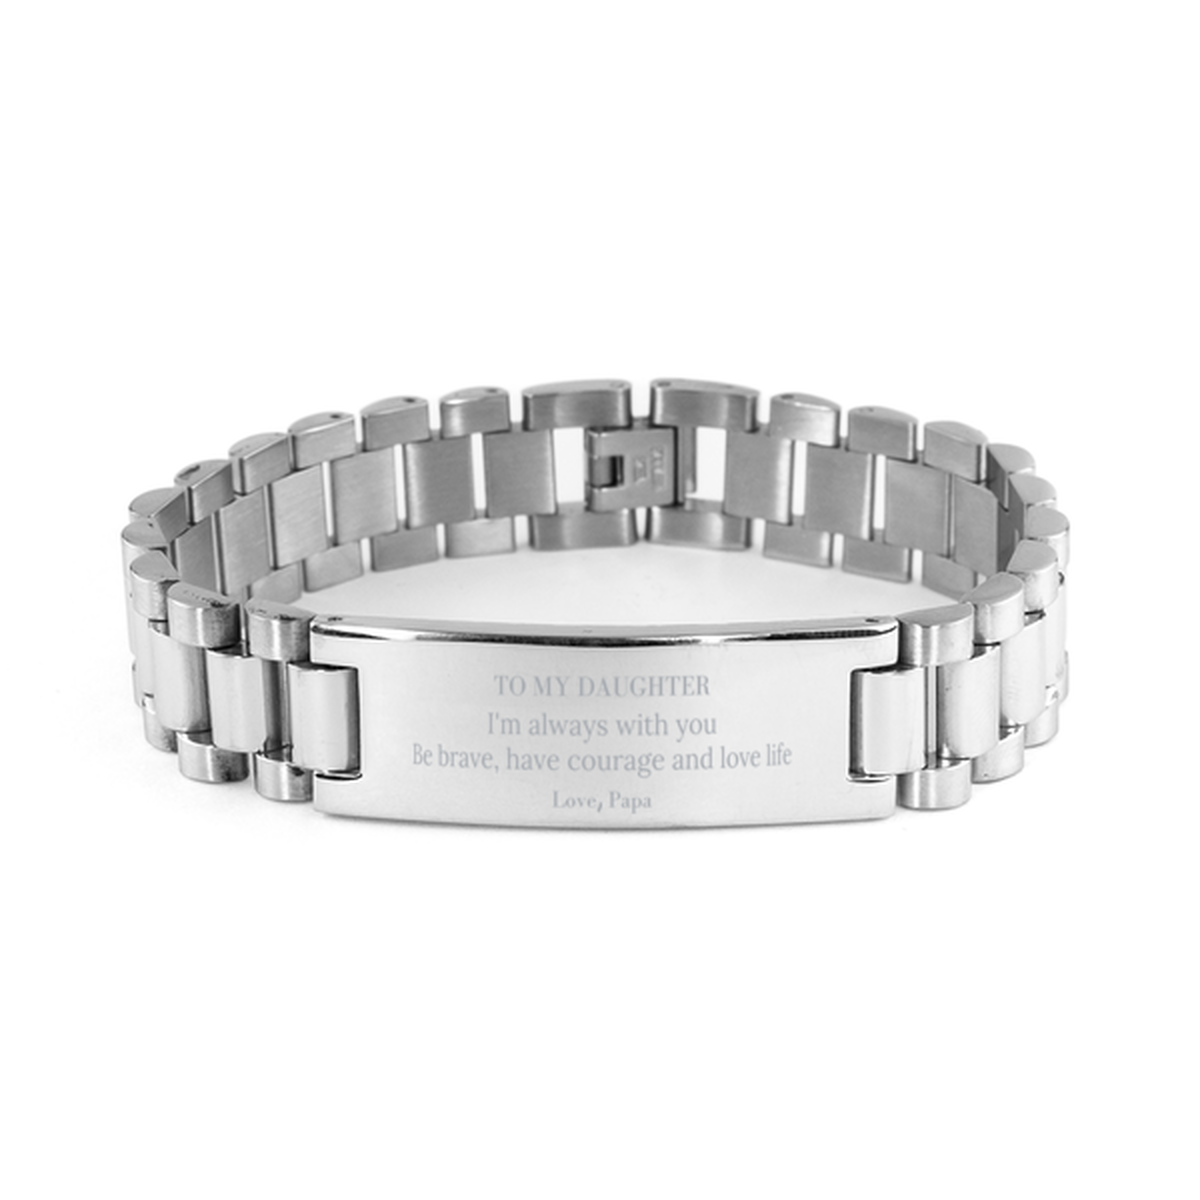 To My Daughter Gifts from Papa, Unique Ladder Stainless Steel Bracelet Inspirational Christmas Birthday Graduation Gifts for Daughter I'm always with you. Be brave, have courage and love life. Love, Papa